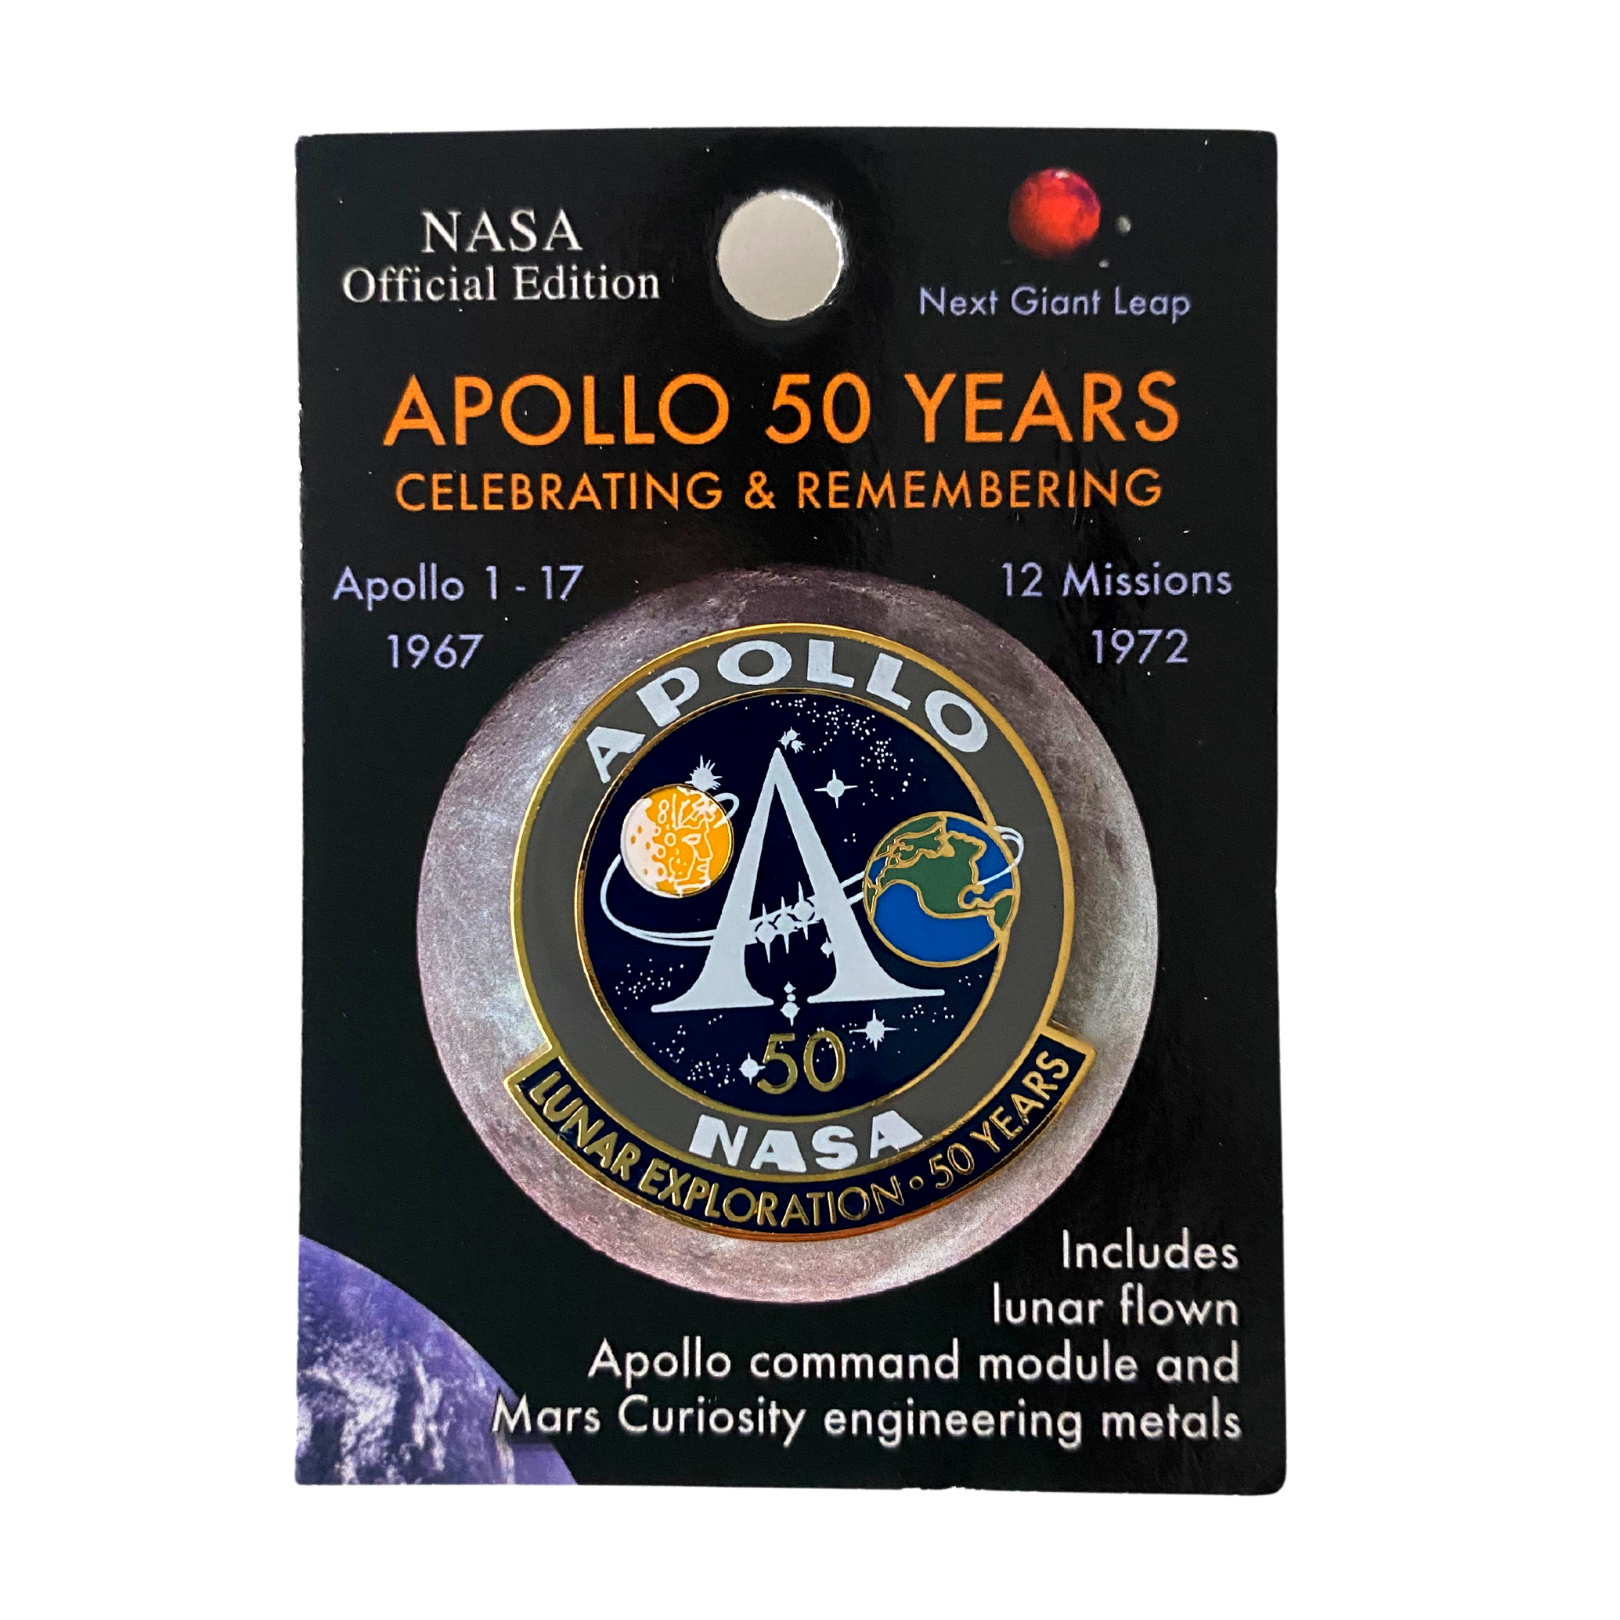 NASA Official Edition - Apollo 50 Years of Lunar Exploration, Celebrating and Remembering Lapel Pin